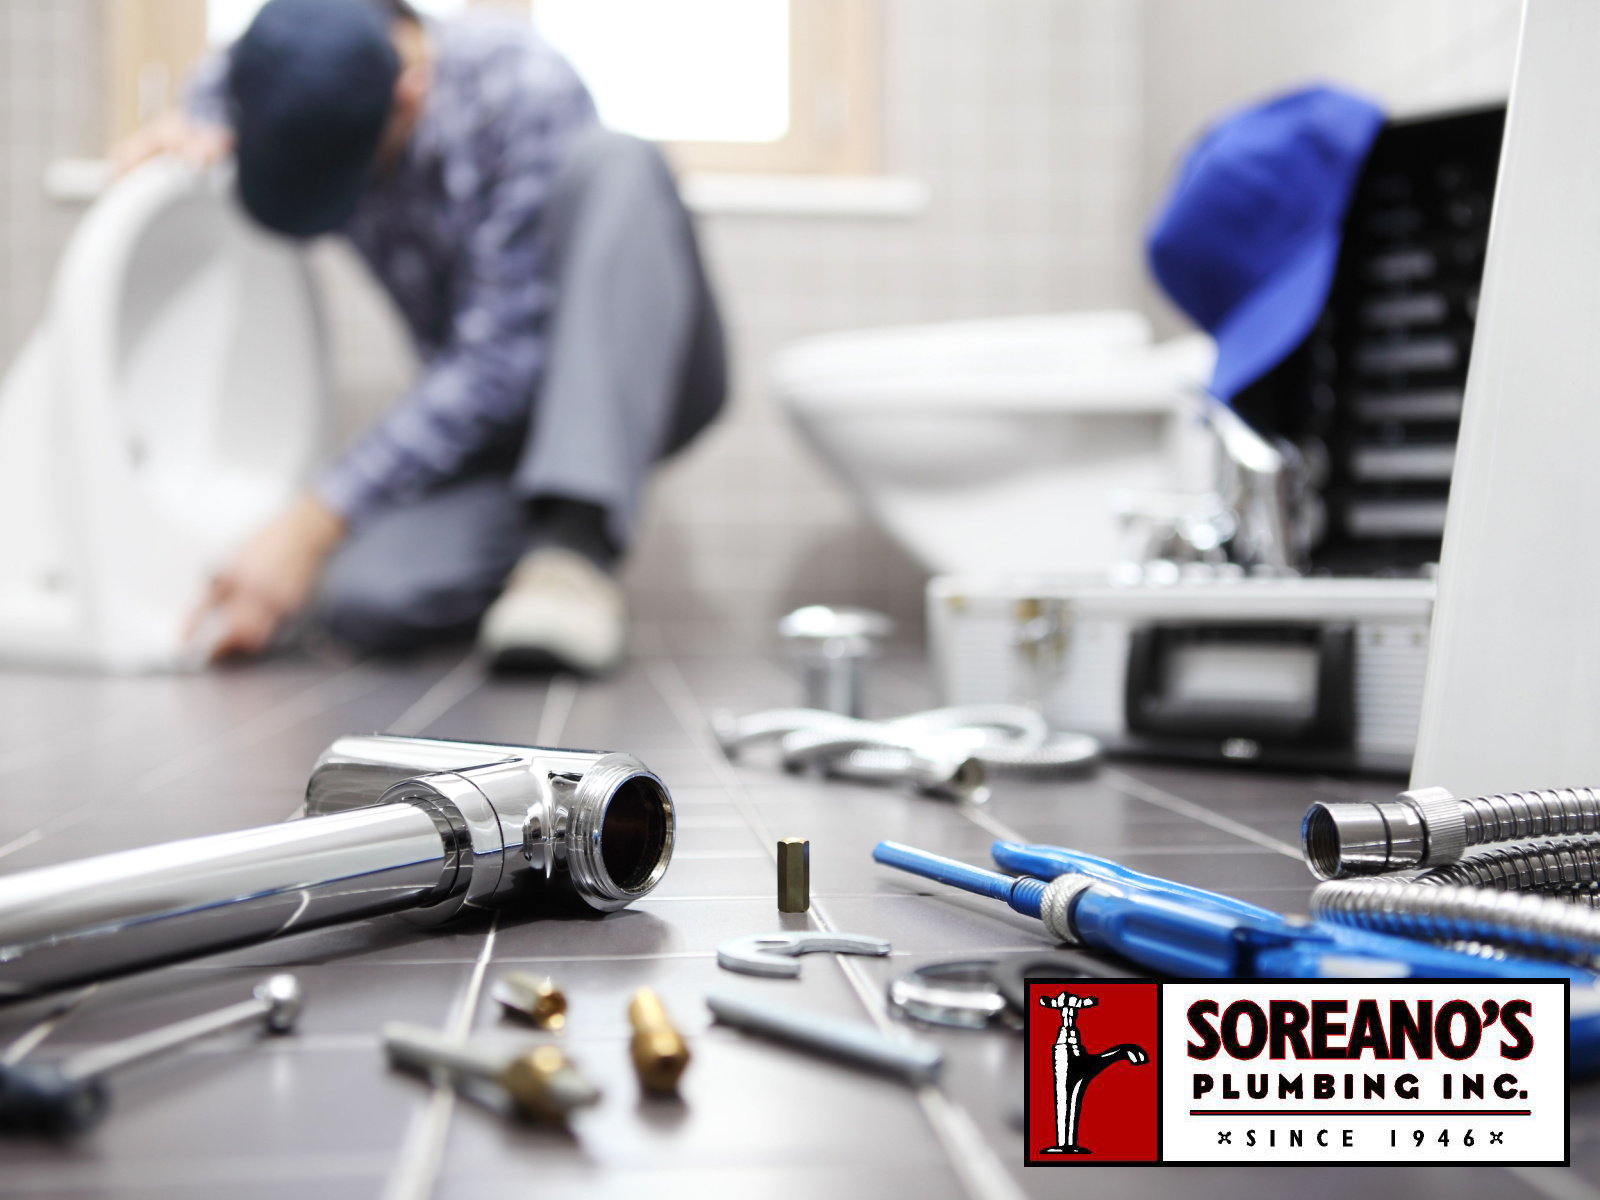 Soreano's Plumbing for Plumber Repair Services in King County